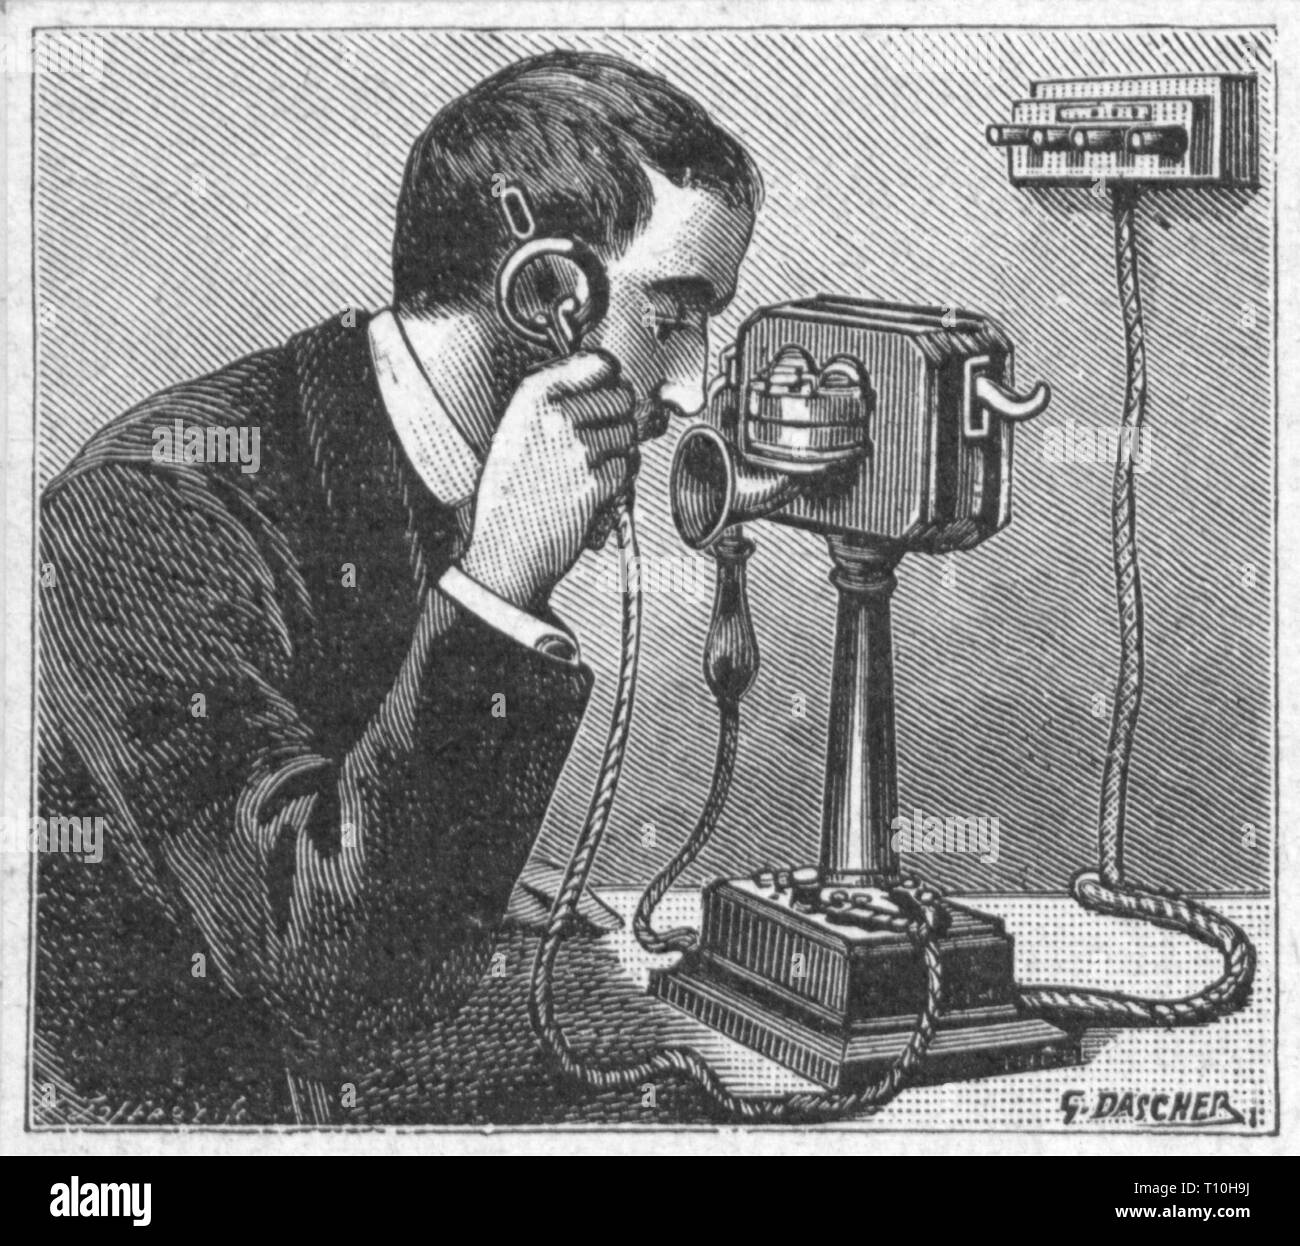 mail, telephone, phoning man, wood engraving after drawing by Georges Adolphe Dascher, early 20th century, telephone set, telephone sets, telecom, transfer of information, communication, communications, technics, telecommunication, telecommunications, ring, buzz, rings, telephone call, phone call, telephone conversation, telephone calls, phone calls, telephone conversations, outgoing call, incoming call, phoning, calling, call, people, France, 1900s, mail, post, telephone, phone, telephones, phones, man, men, historic, historical, Artist's Copyright has not to be cleared Stock Photo